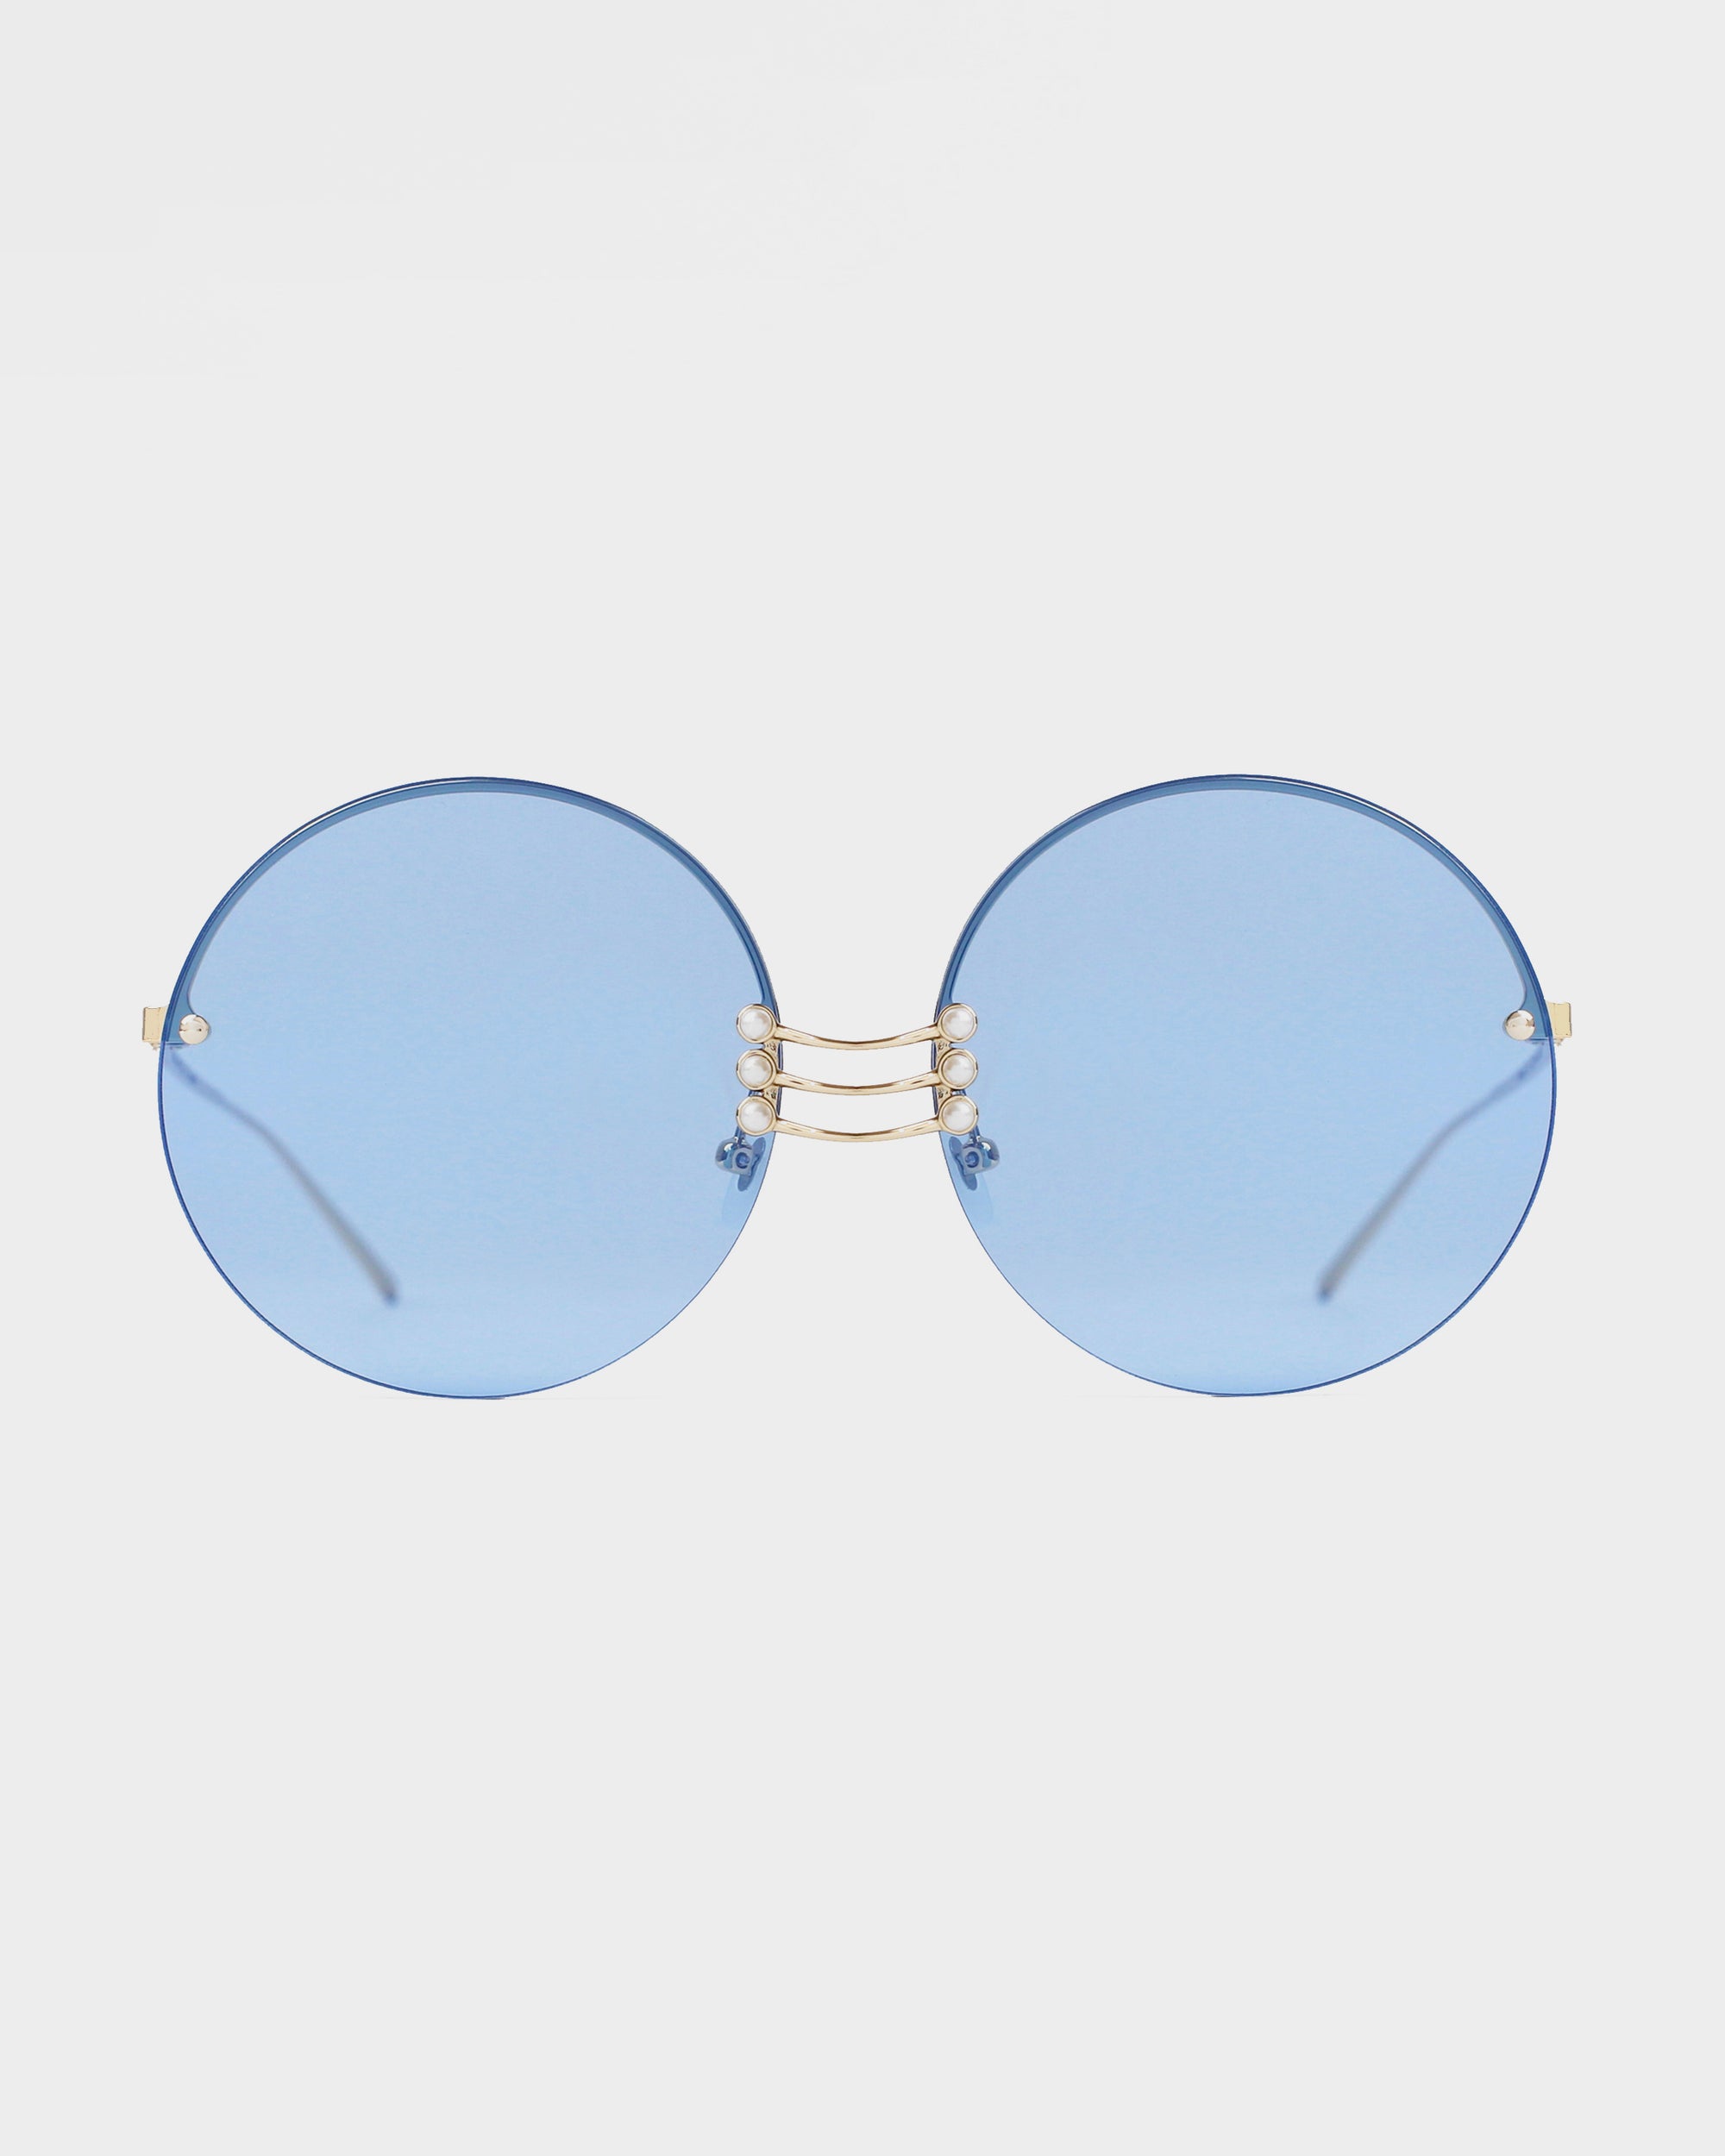 A pair of Vermeer sunglasses from For Art's Sake® with blue lenses and a thin gold metal frame. The bridge of the Vermeer sunglasses features two small connected bars, while the stainless steel frames ensure durability. The background is plain white, allowing the Vermeer sunglasses to be the focal point.